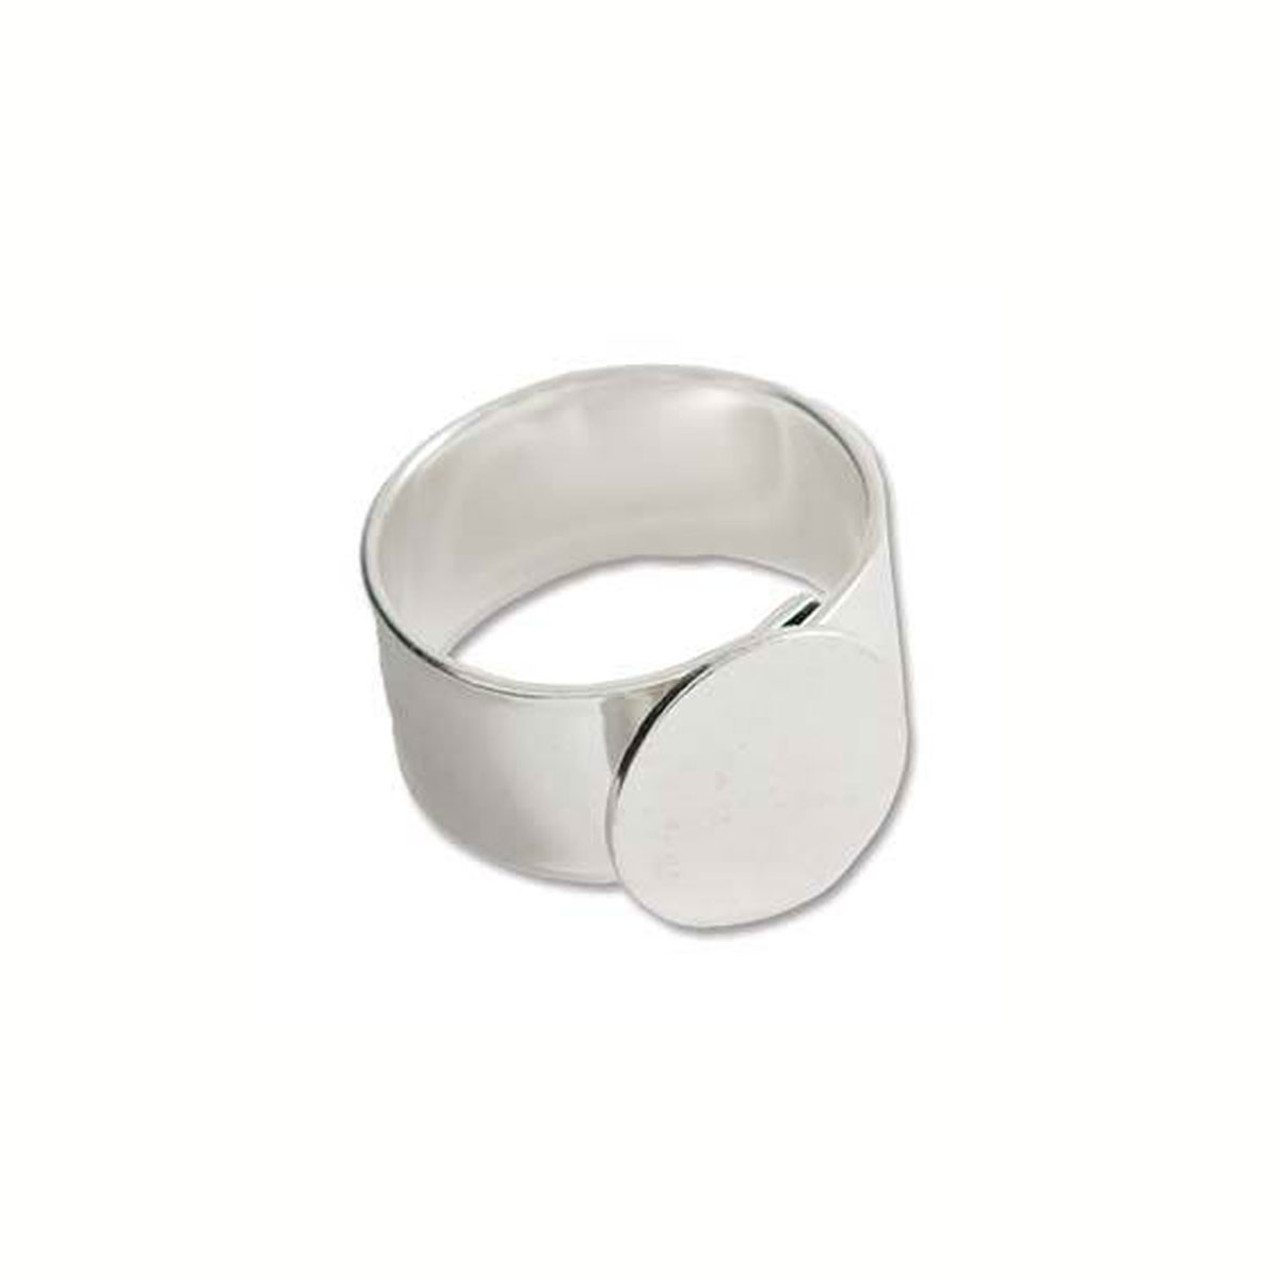 Ring With Mount and Adjustable Band - Antique Silver - 13mm